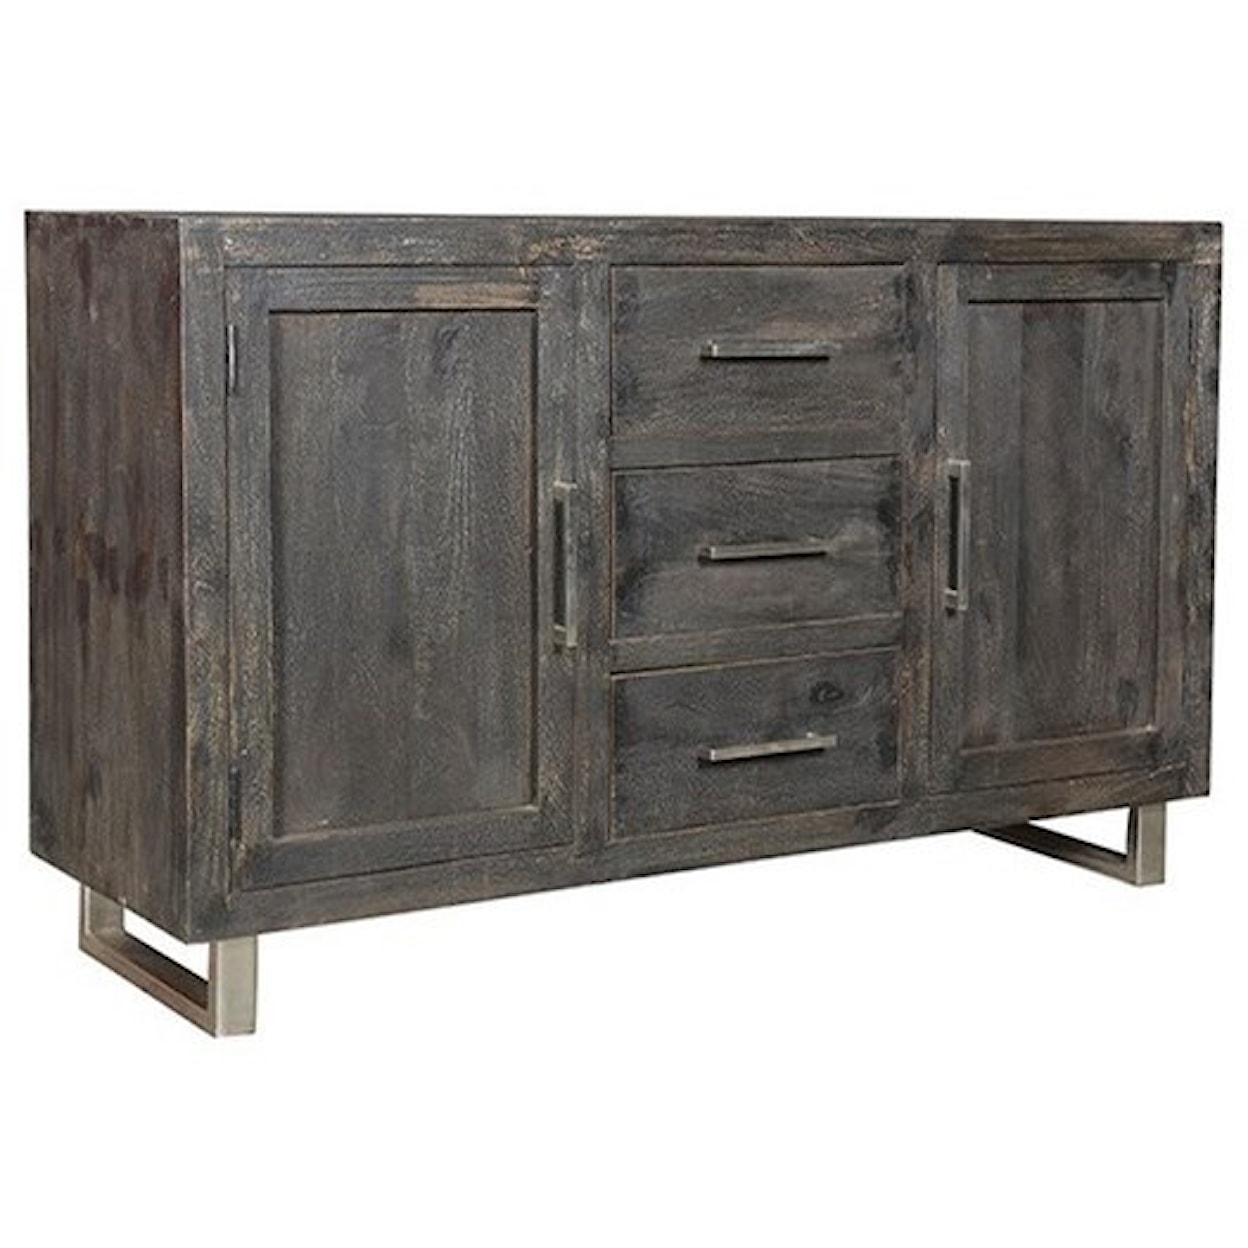 Crestview Collection Accent Furniture Mango Wood Ebony Sideboard